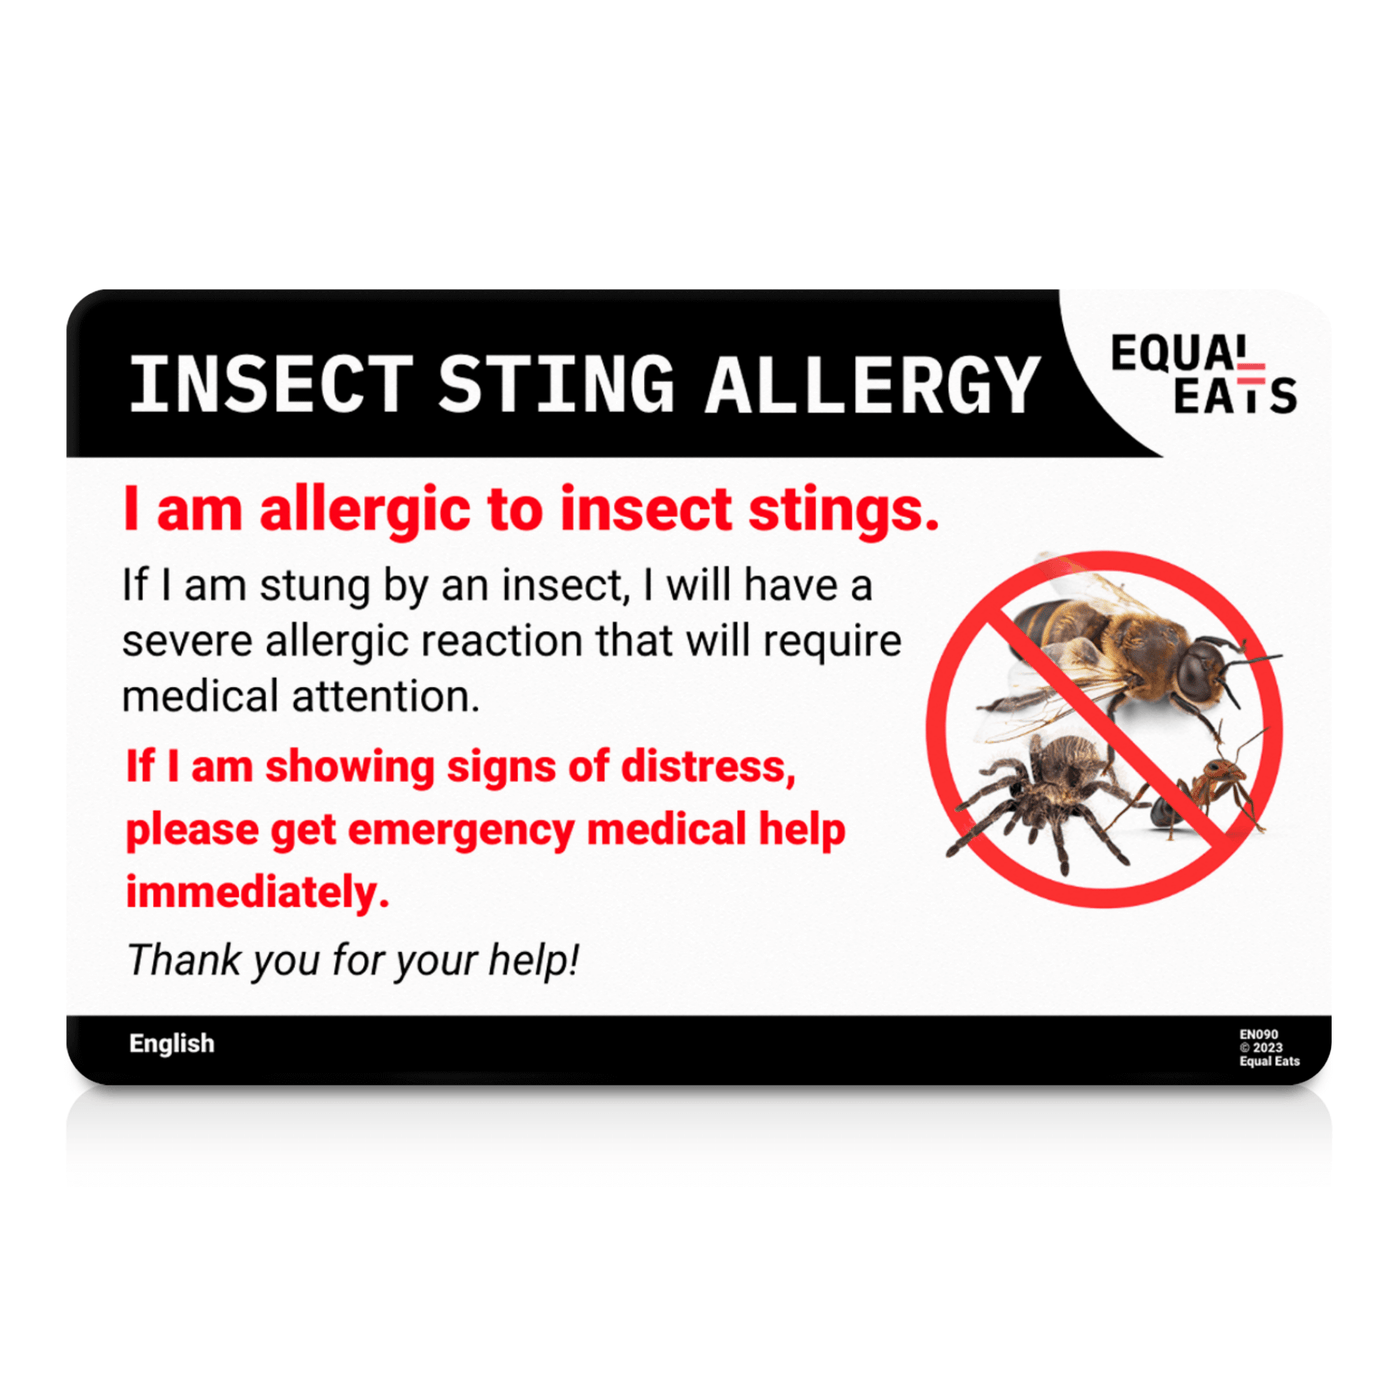 Portuguese (Brazil) Insect Sting Allergy Card